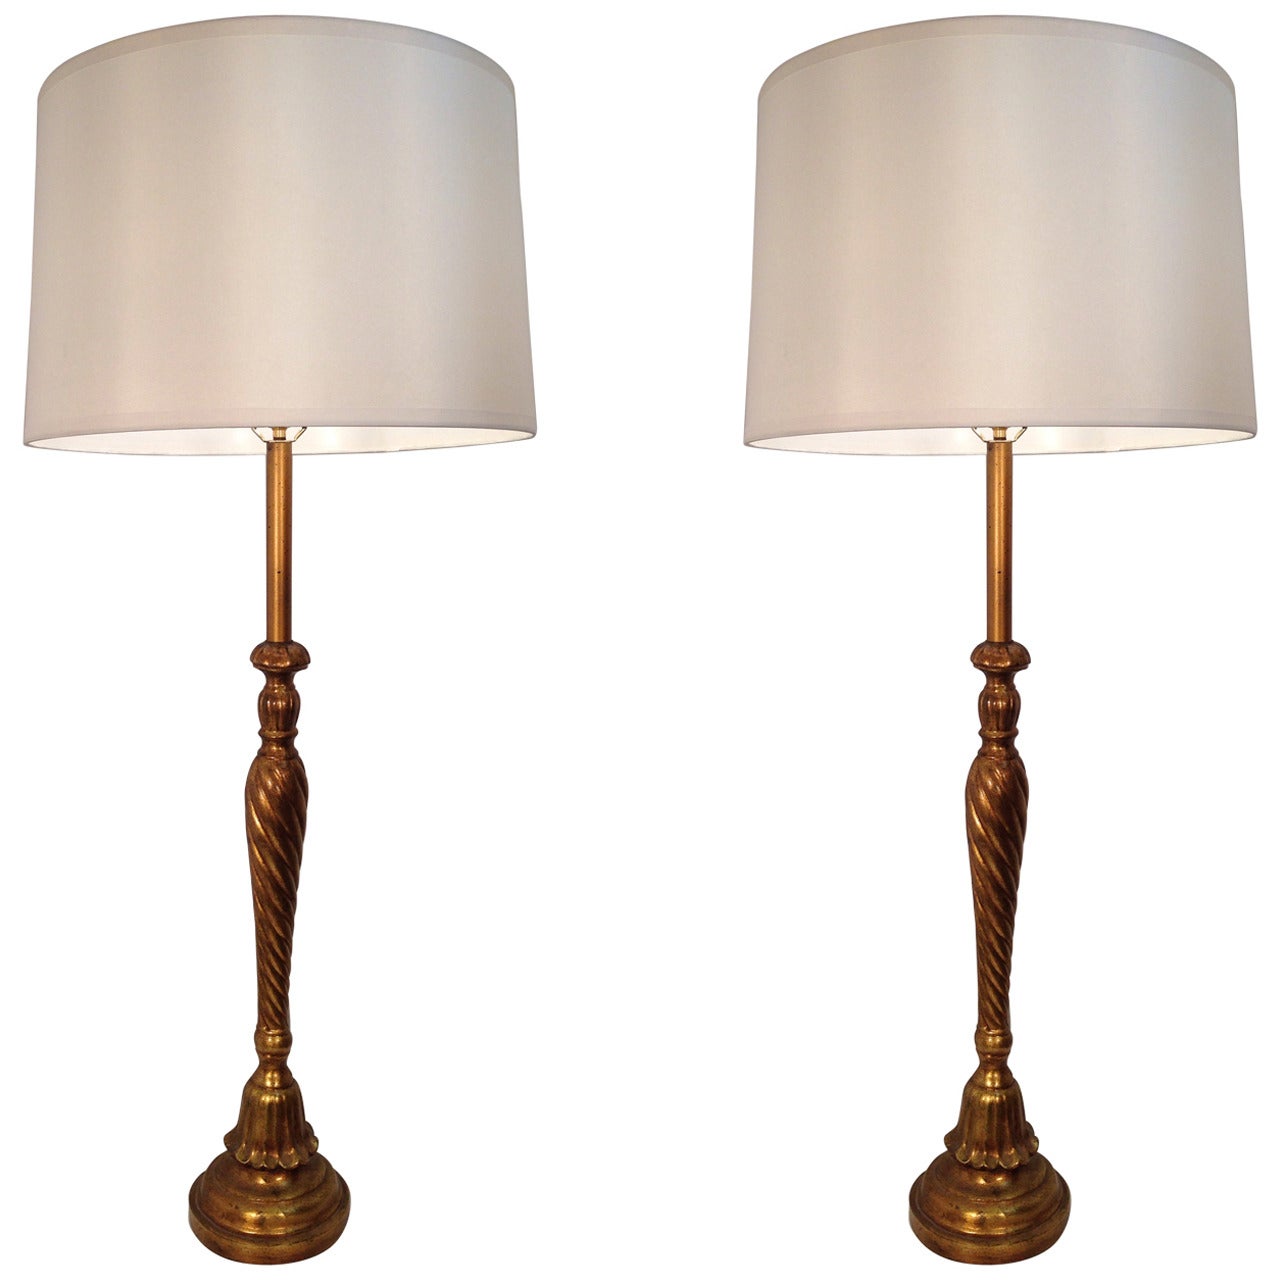 Handmade Pair of Tall Table Lamps by Maitland-Smith